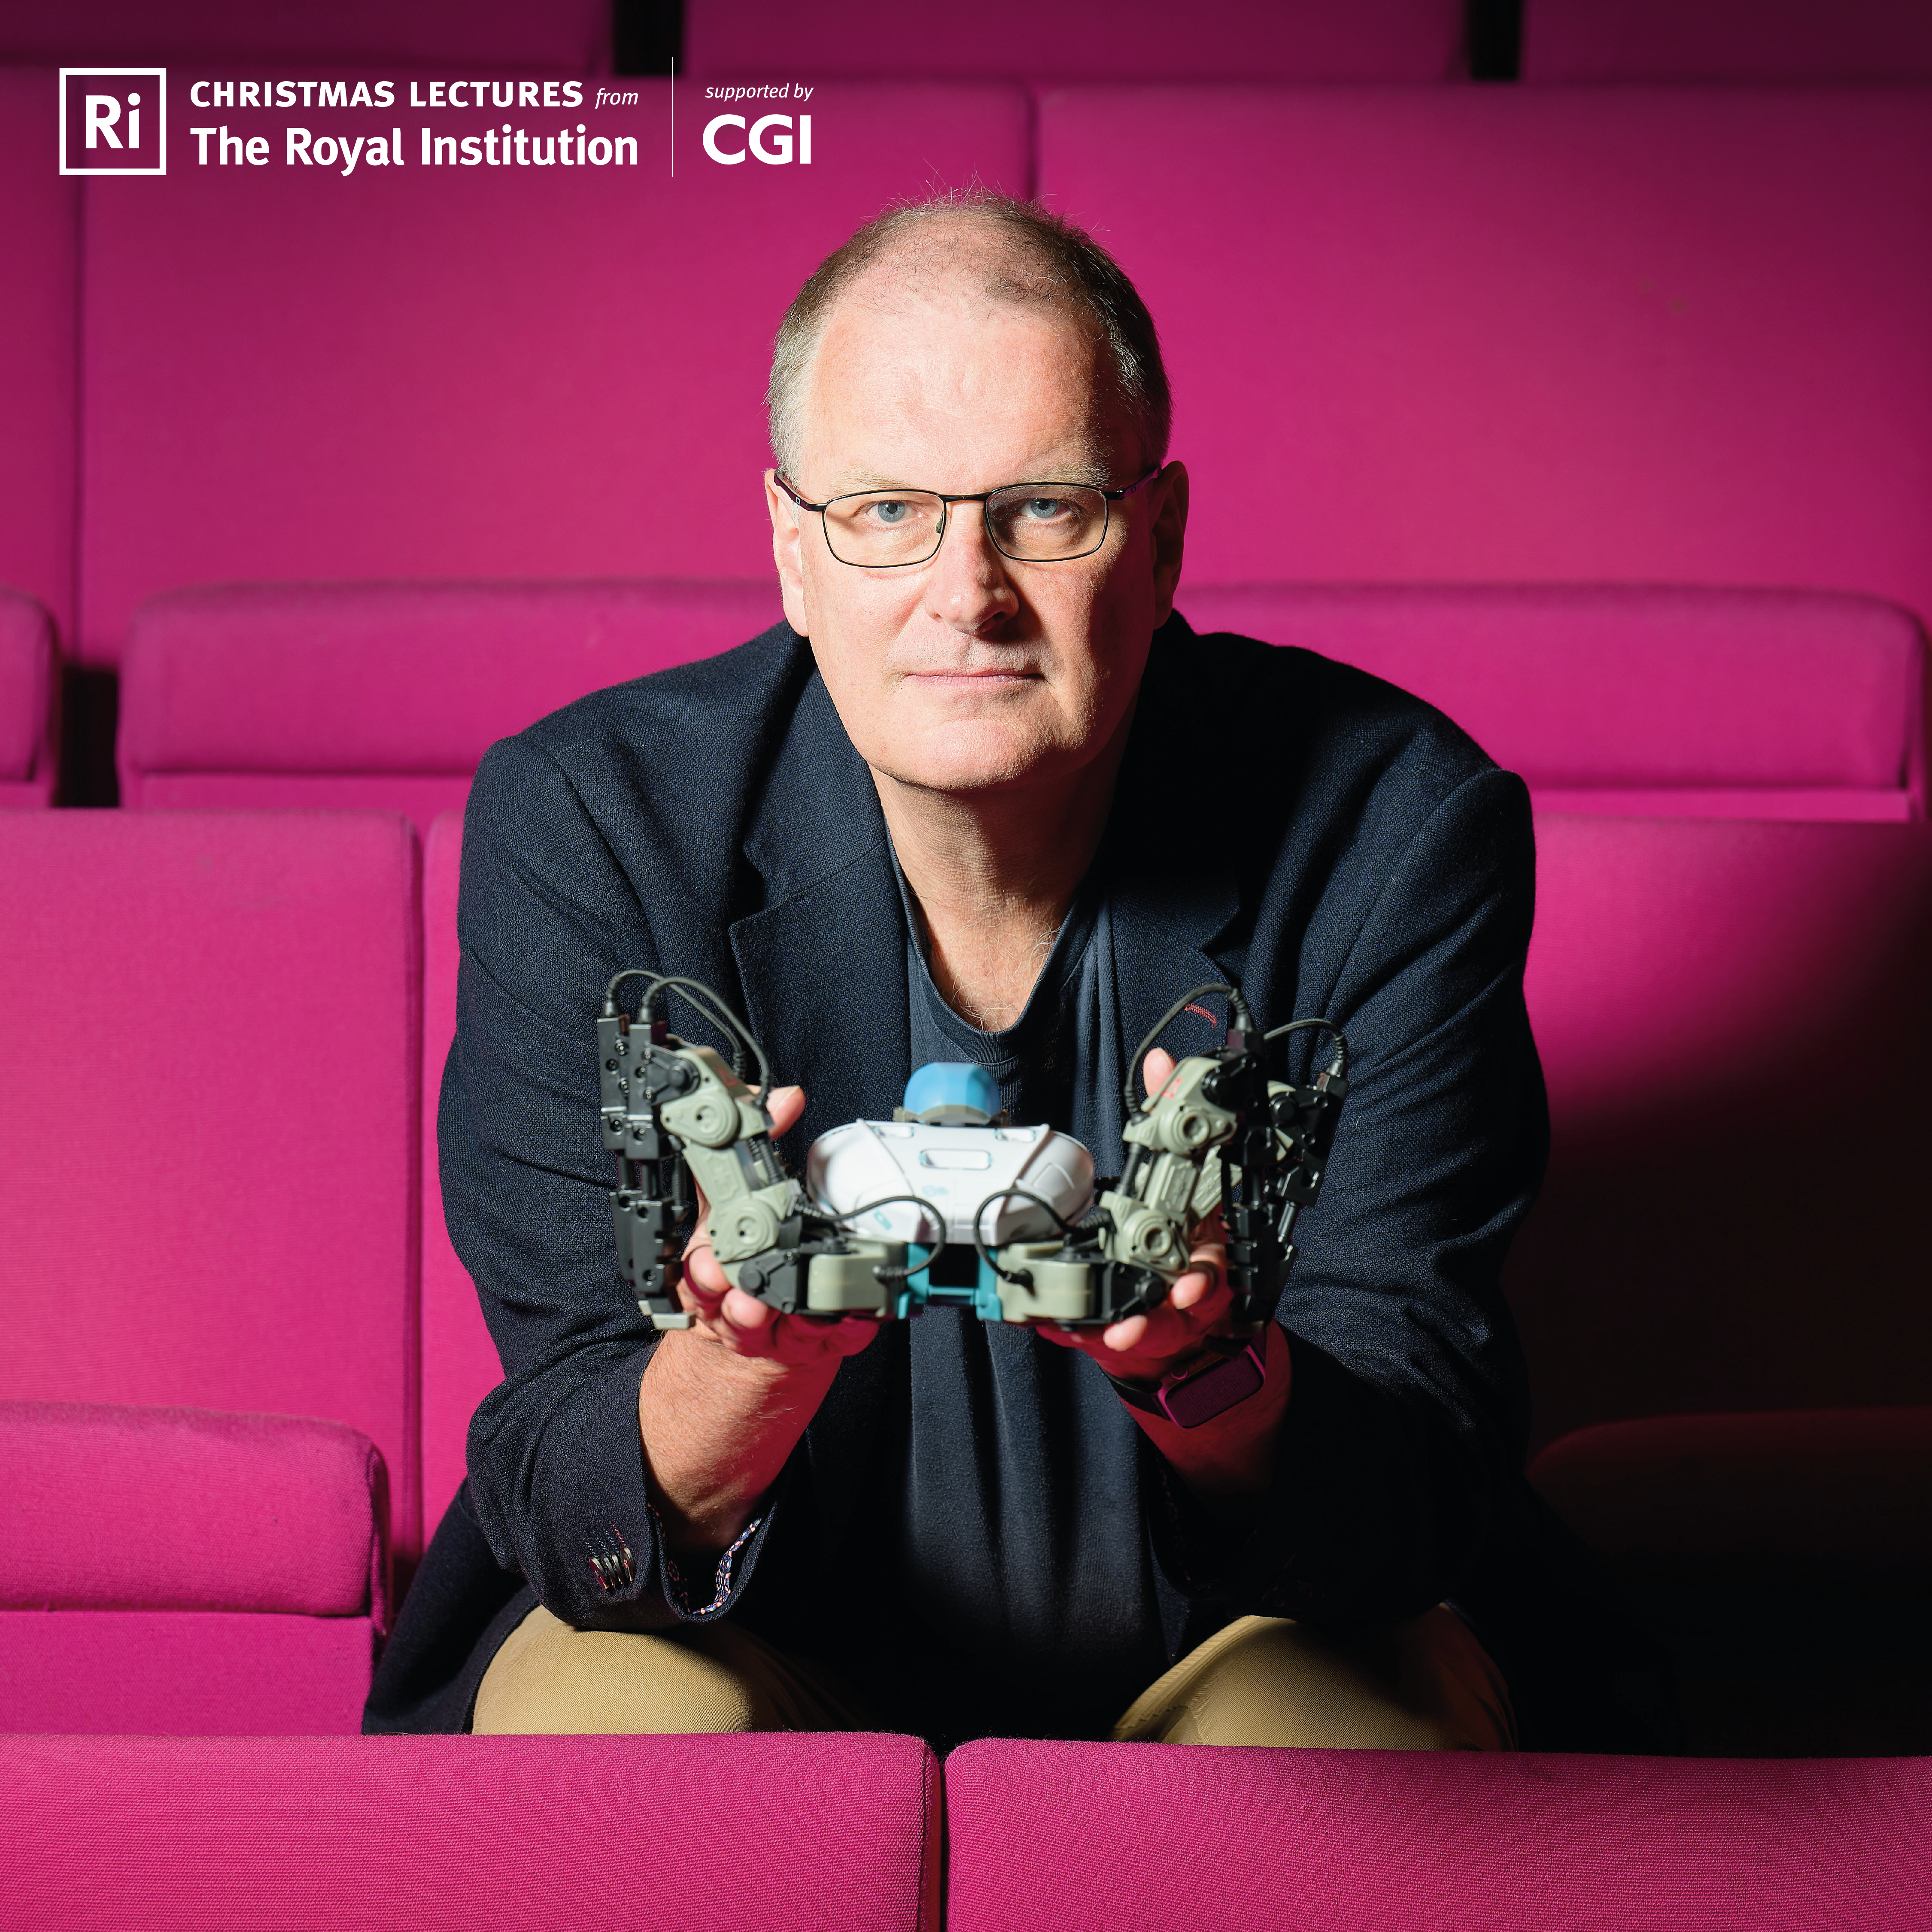 A photo of Mike Woolridge sitting on a pink lecture theatre chair. He is holding a robotic device. It is hard to see what the device is, exactly.